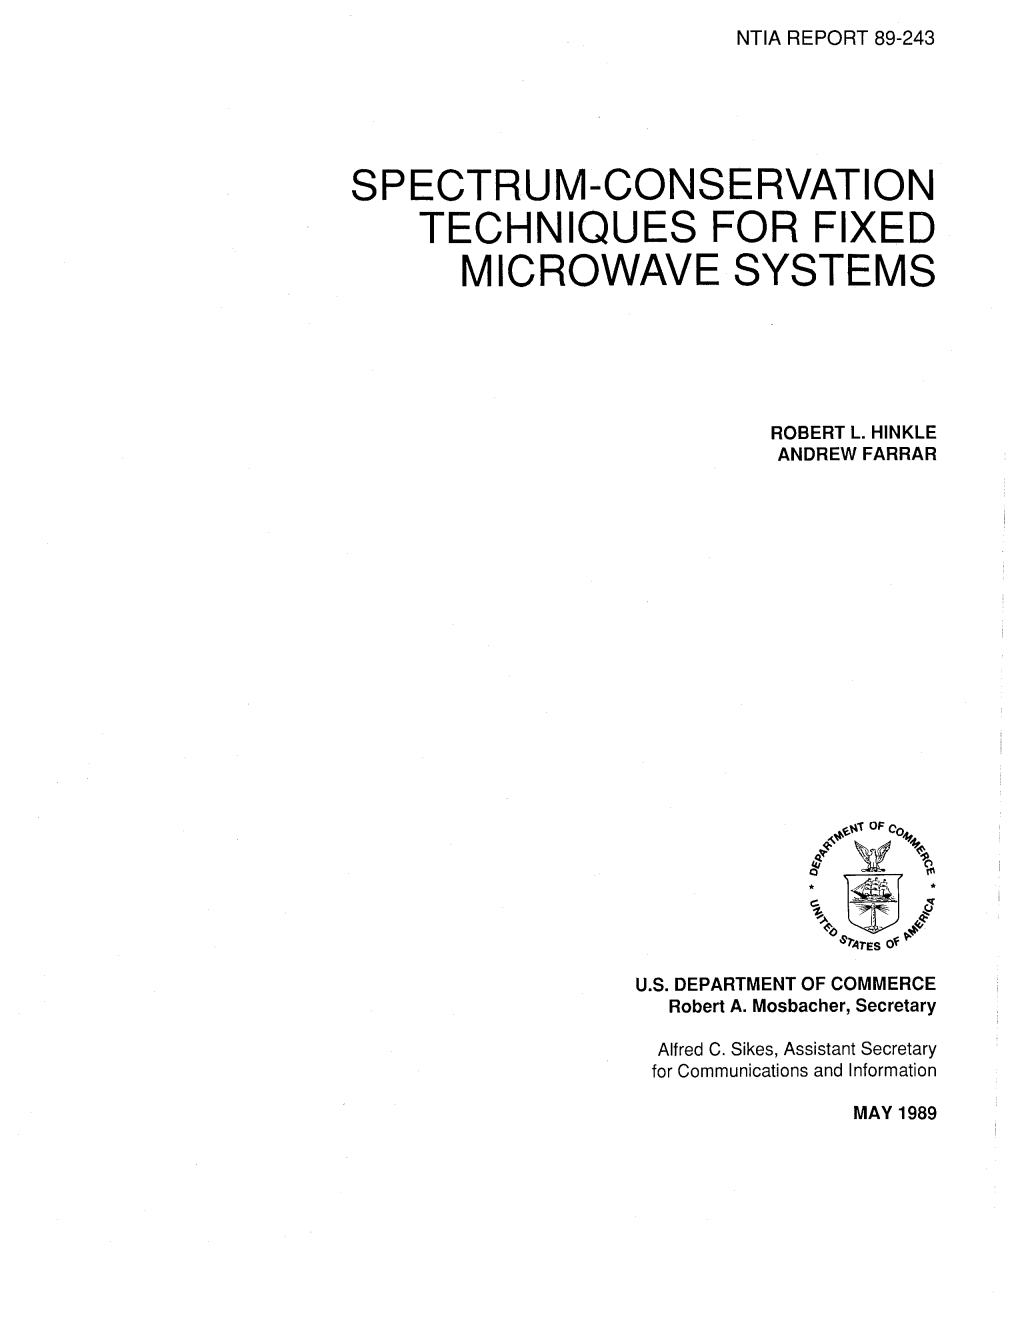 NTIA Technical Report TR-89-243 Spectrum–Conservation Techniques for Fixed Microwave Systems